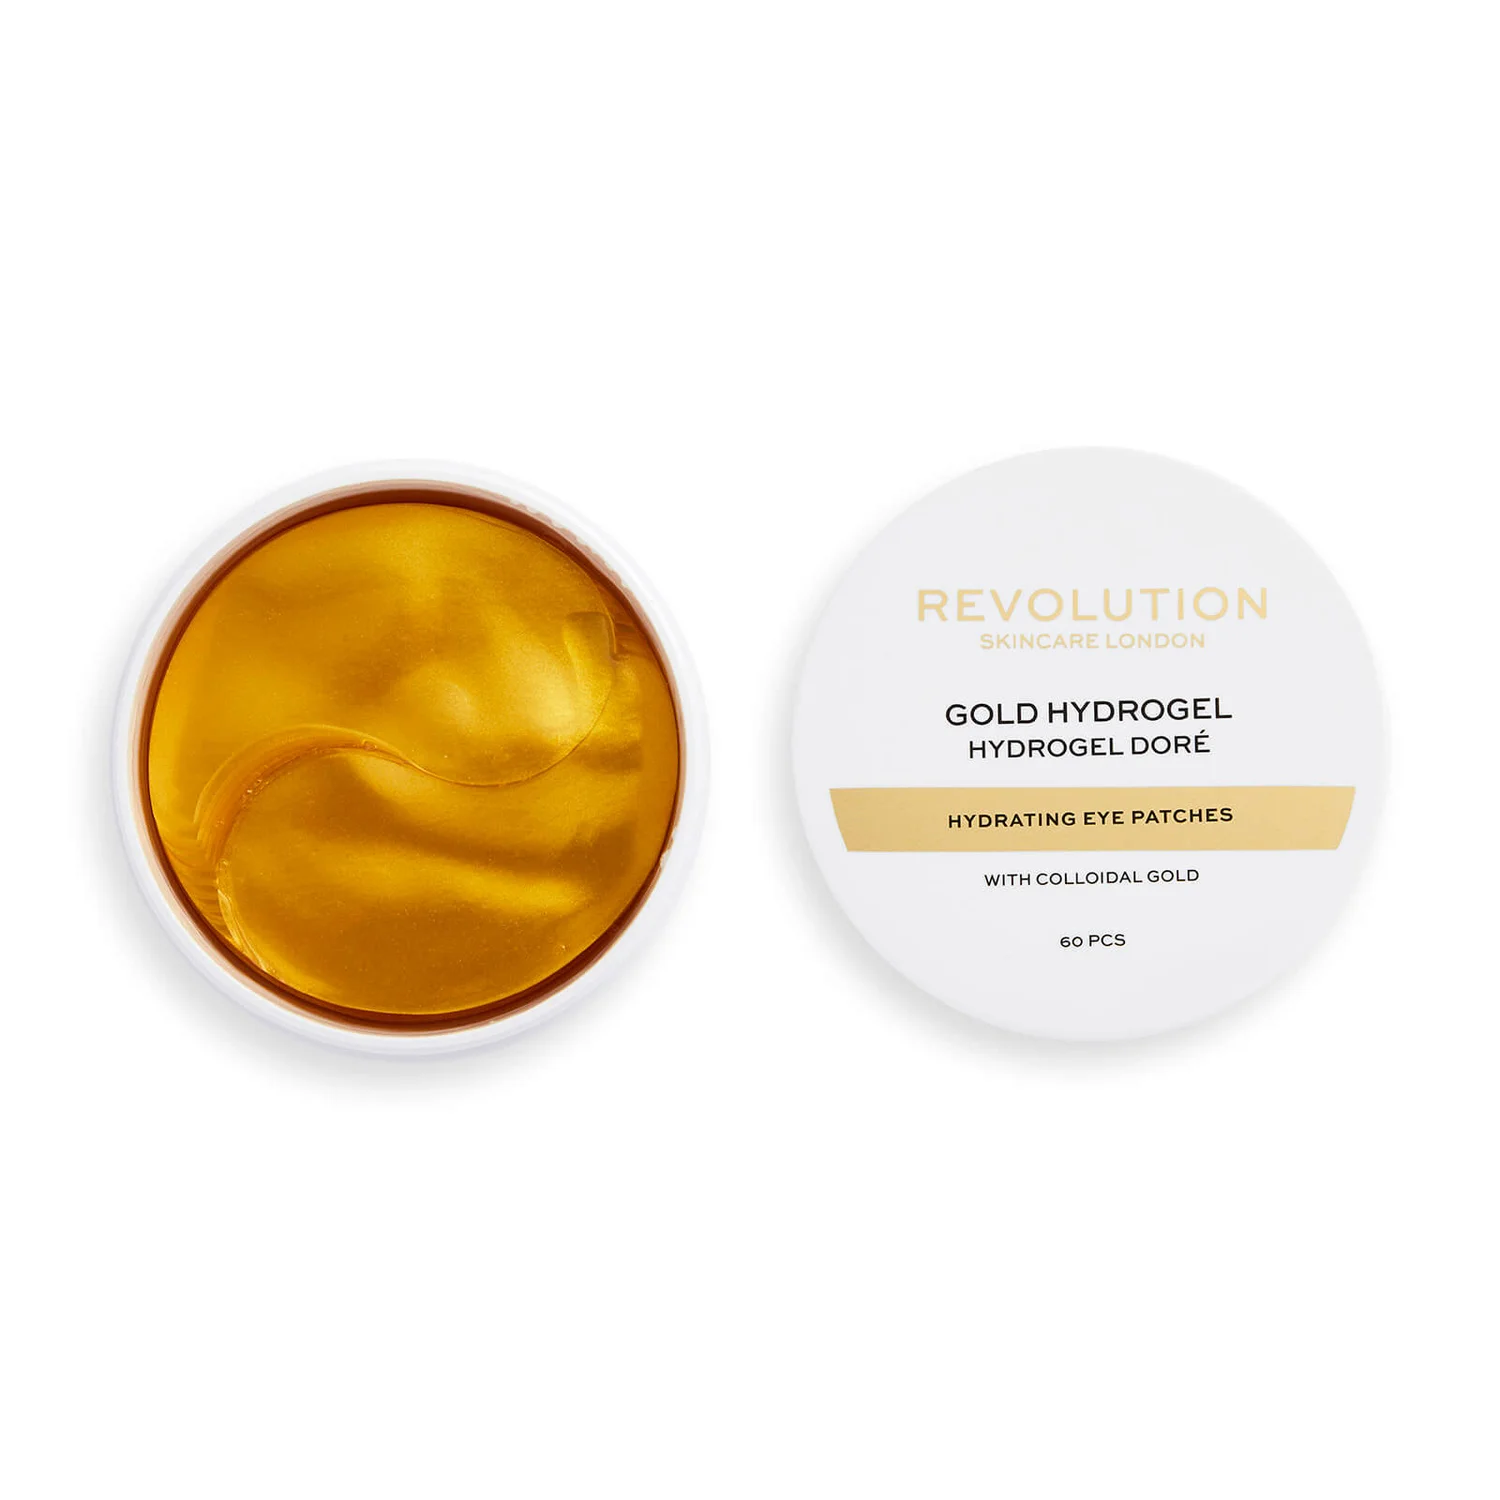 Icon image of 24K Gold Pure Luxury Lift & Firm Hydra-Gel Eye Patches for side-by-side ingredient comparison.